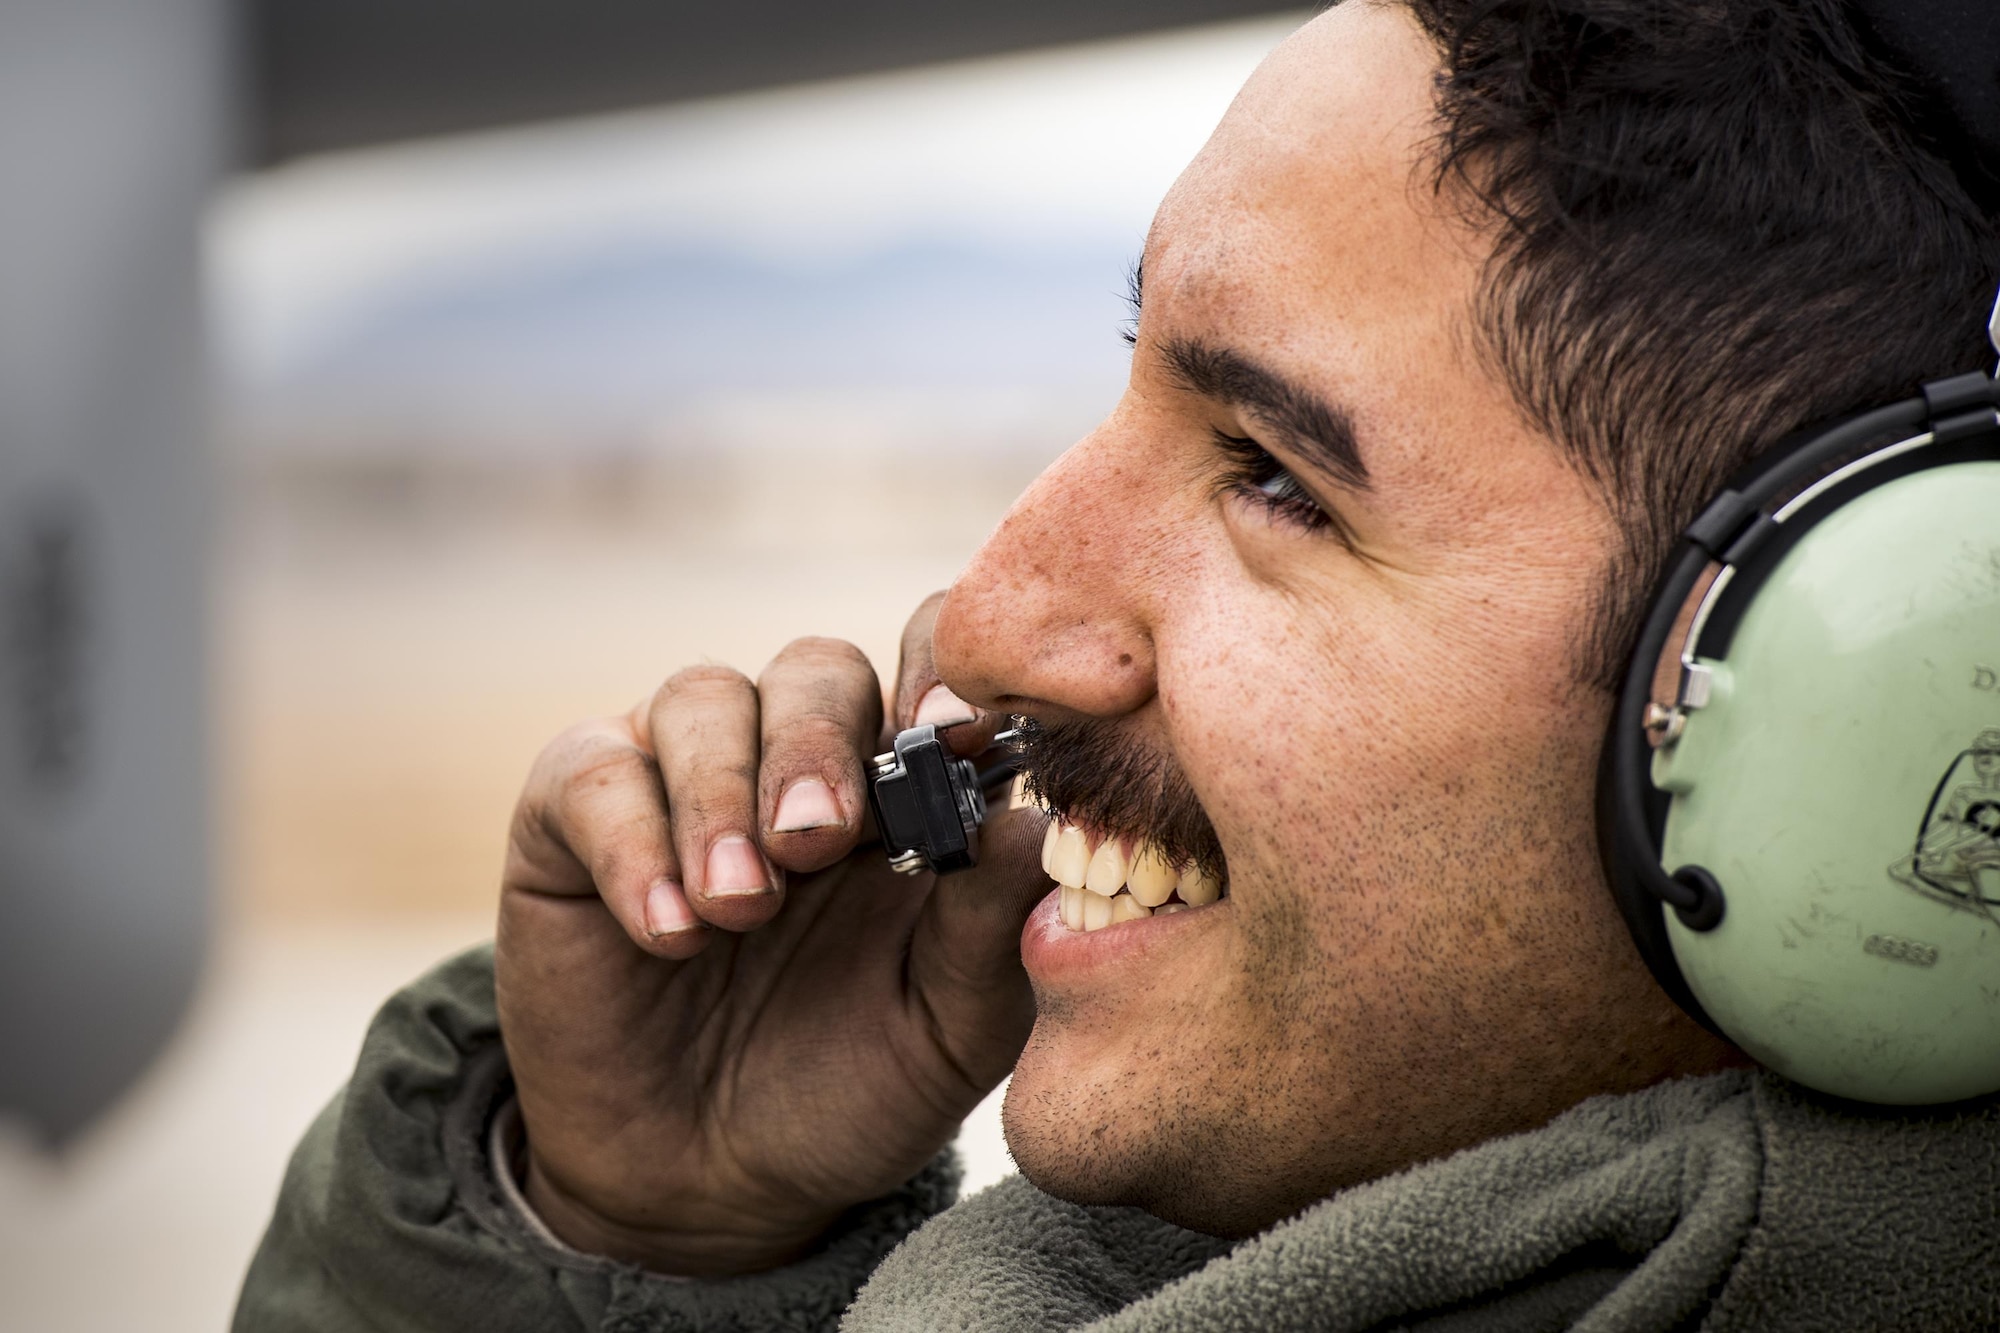 Senior Airman Dalton Torres, 74th Aircraft Maintenance Unit crew chief, communicates with a pilot prior to launching the aircraft during Green Flag-West 17-03, Jan. 23, 2017, at Nellis Air Force Base, Nev. GFW is an air-land integration combat training exercise, which hosted 12 A-10s from Moody Air Force Base, Ga. Accompanying the aircraft were 130 maintenance personnel who worked around the clock to launch 18 sorties per day. (U.S. Air Force photo by Staff Sgt. Ryan Callaghan)